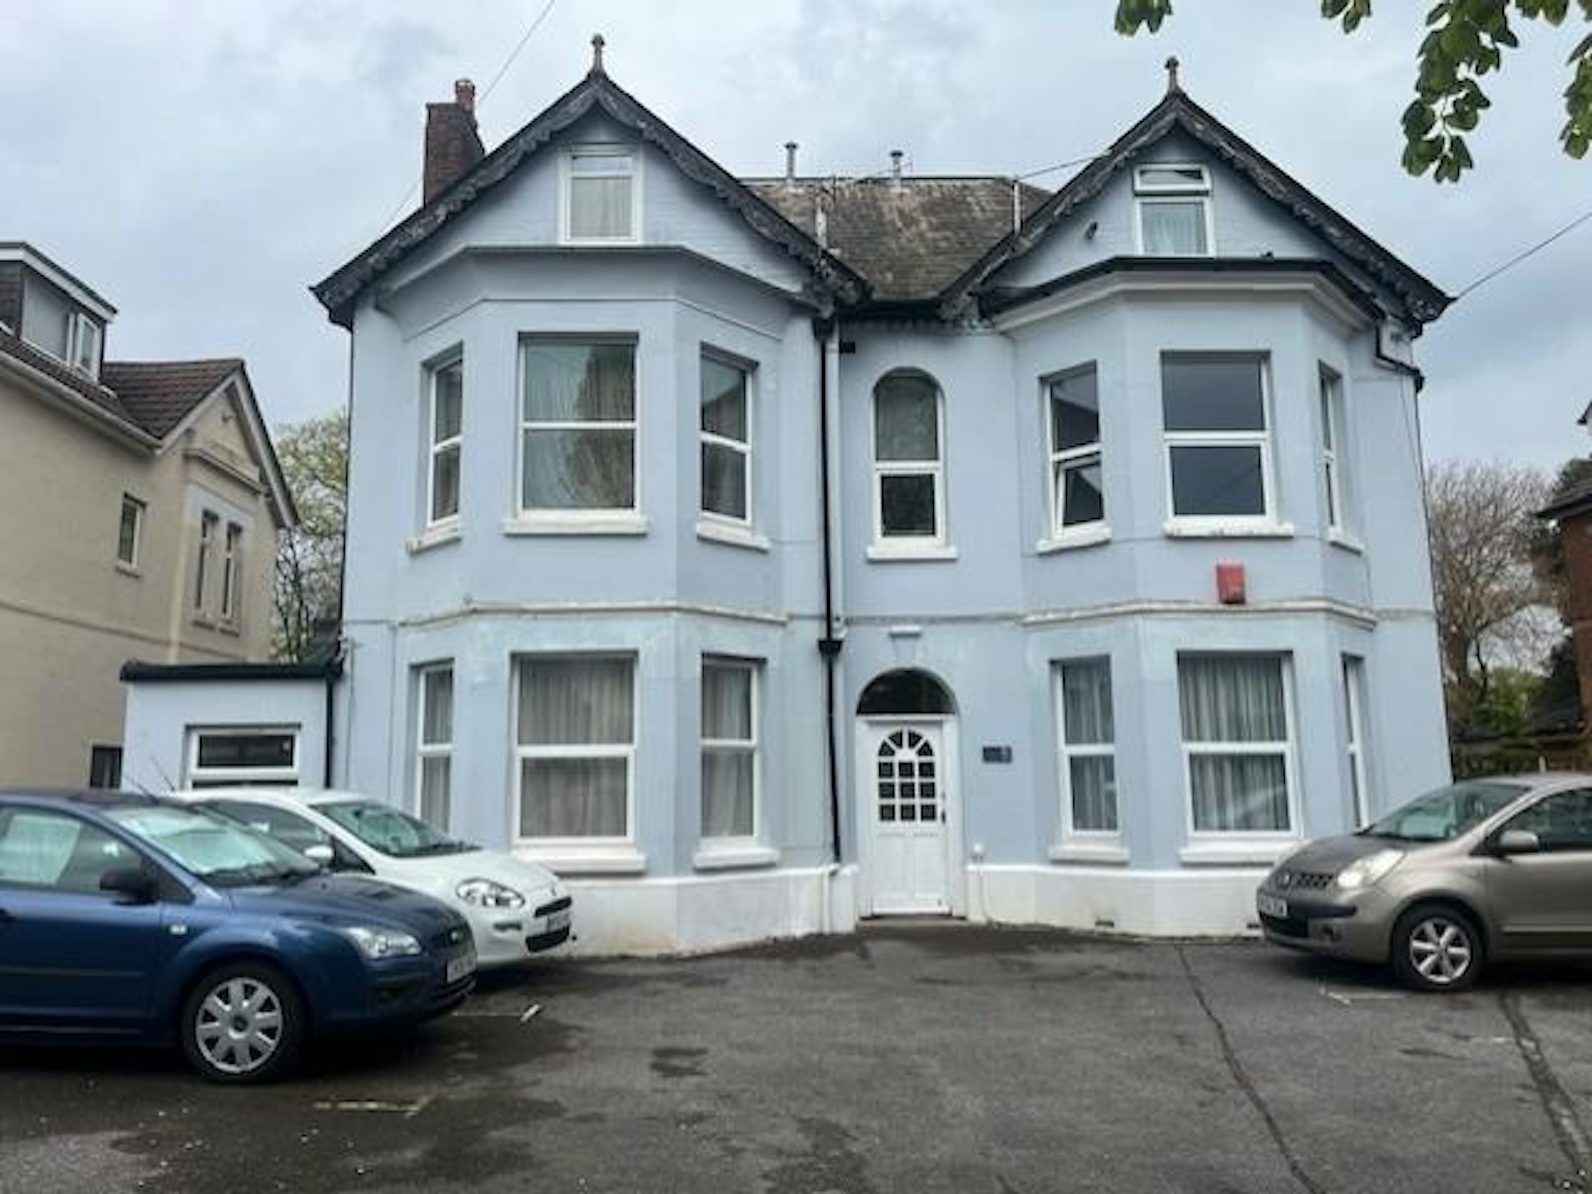 Flat to rent on Westby Road Bournemouth, BH5